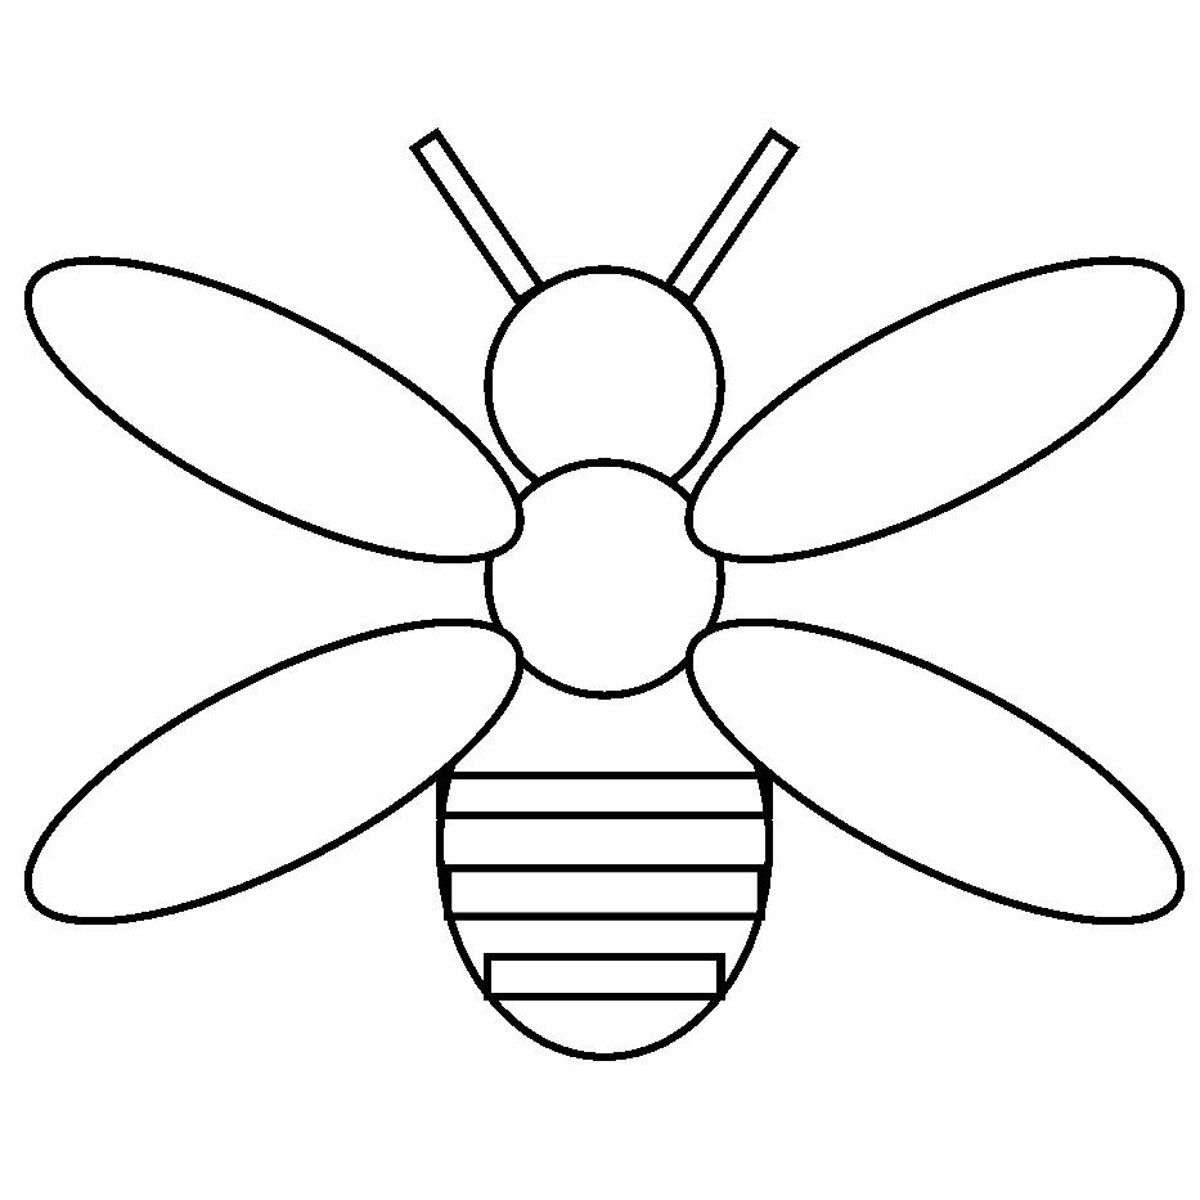 Insect coloring pages to print - Coloring Pages & Pictures - IMAGIXS